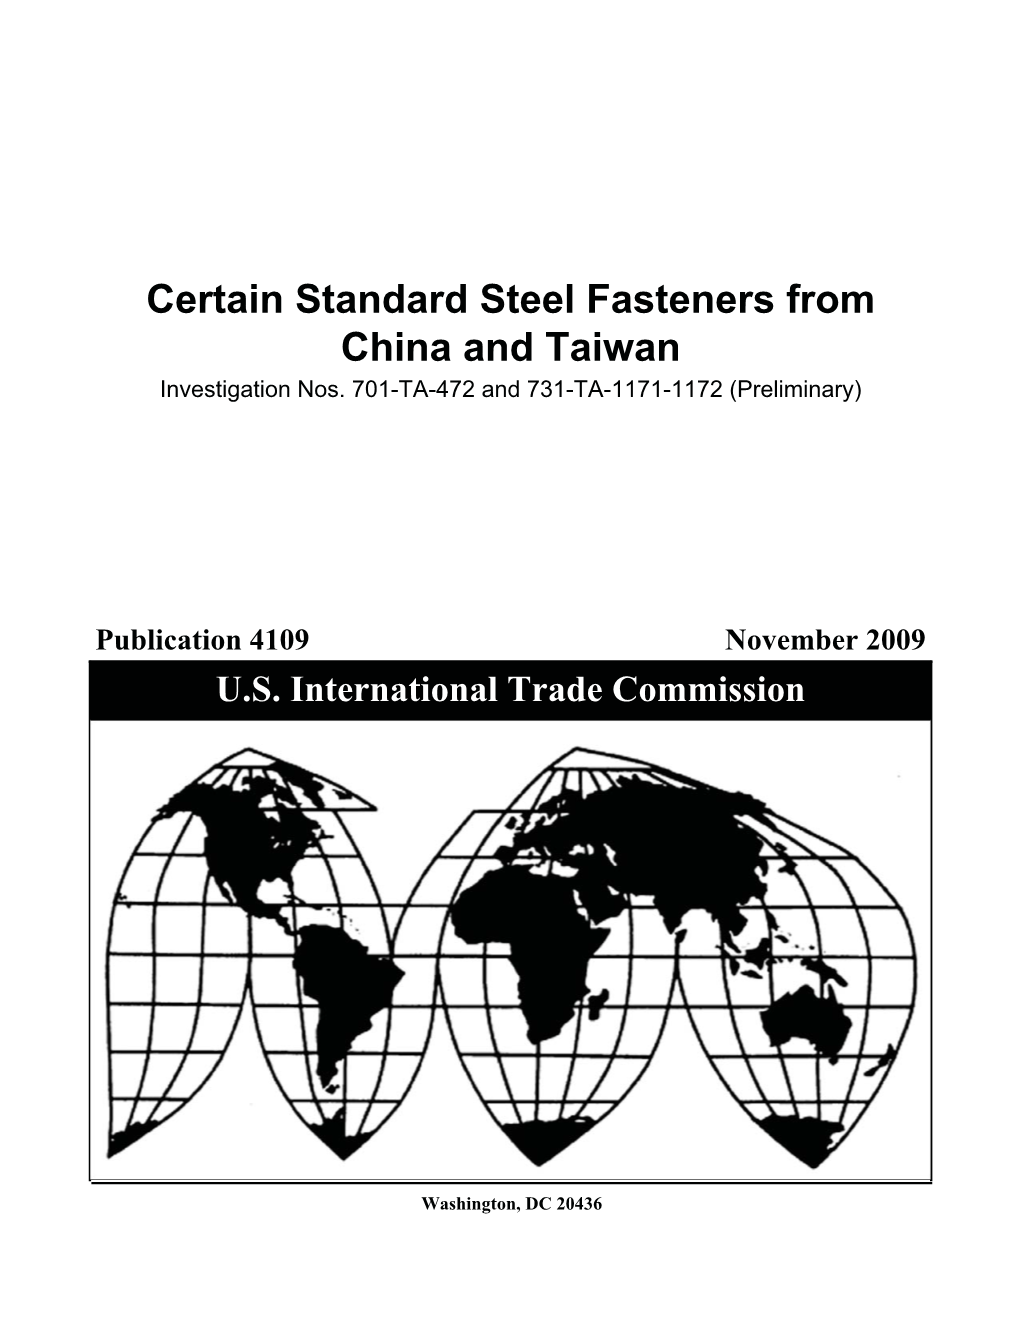 Certain Standard Steel Fasteners from China and Taiwan Investigation Nos